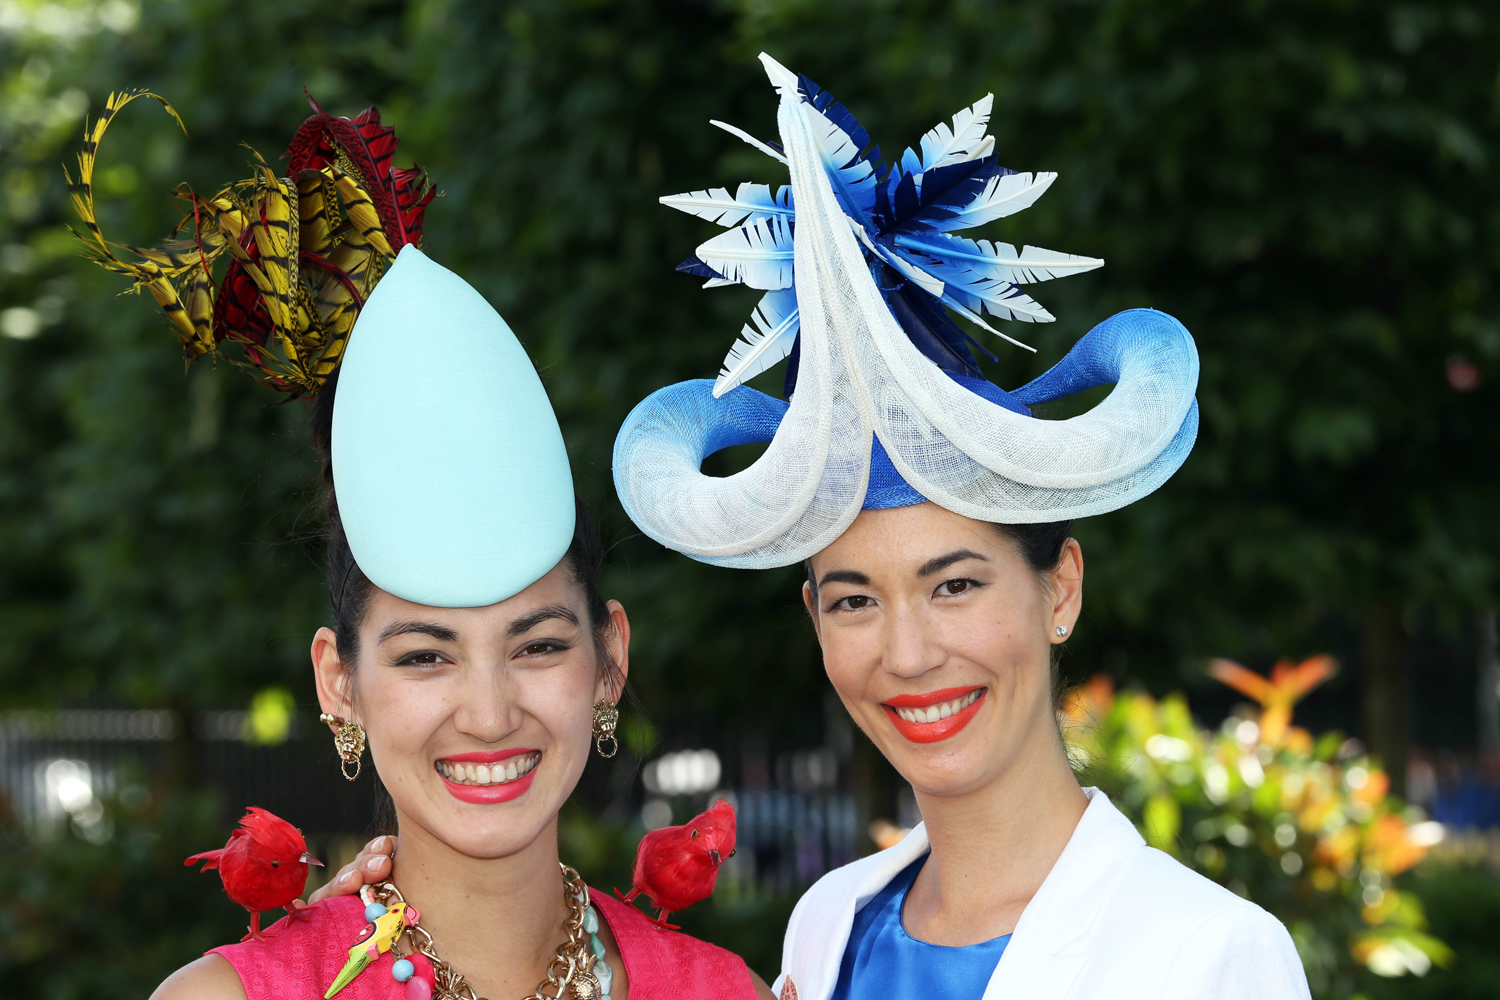 Angela Menz and Lisa Tan on the opening day of Royal Ascot, June 17, 2014.